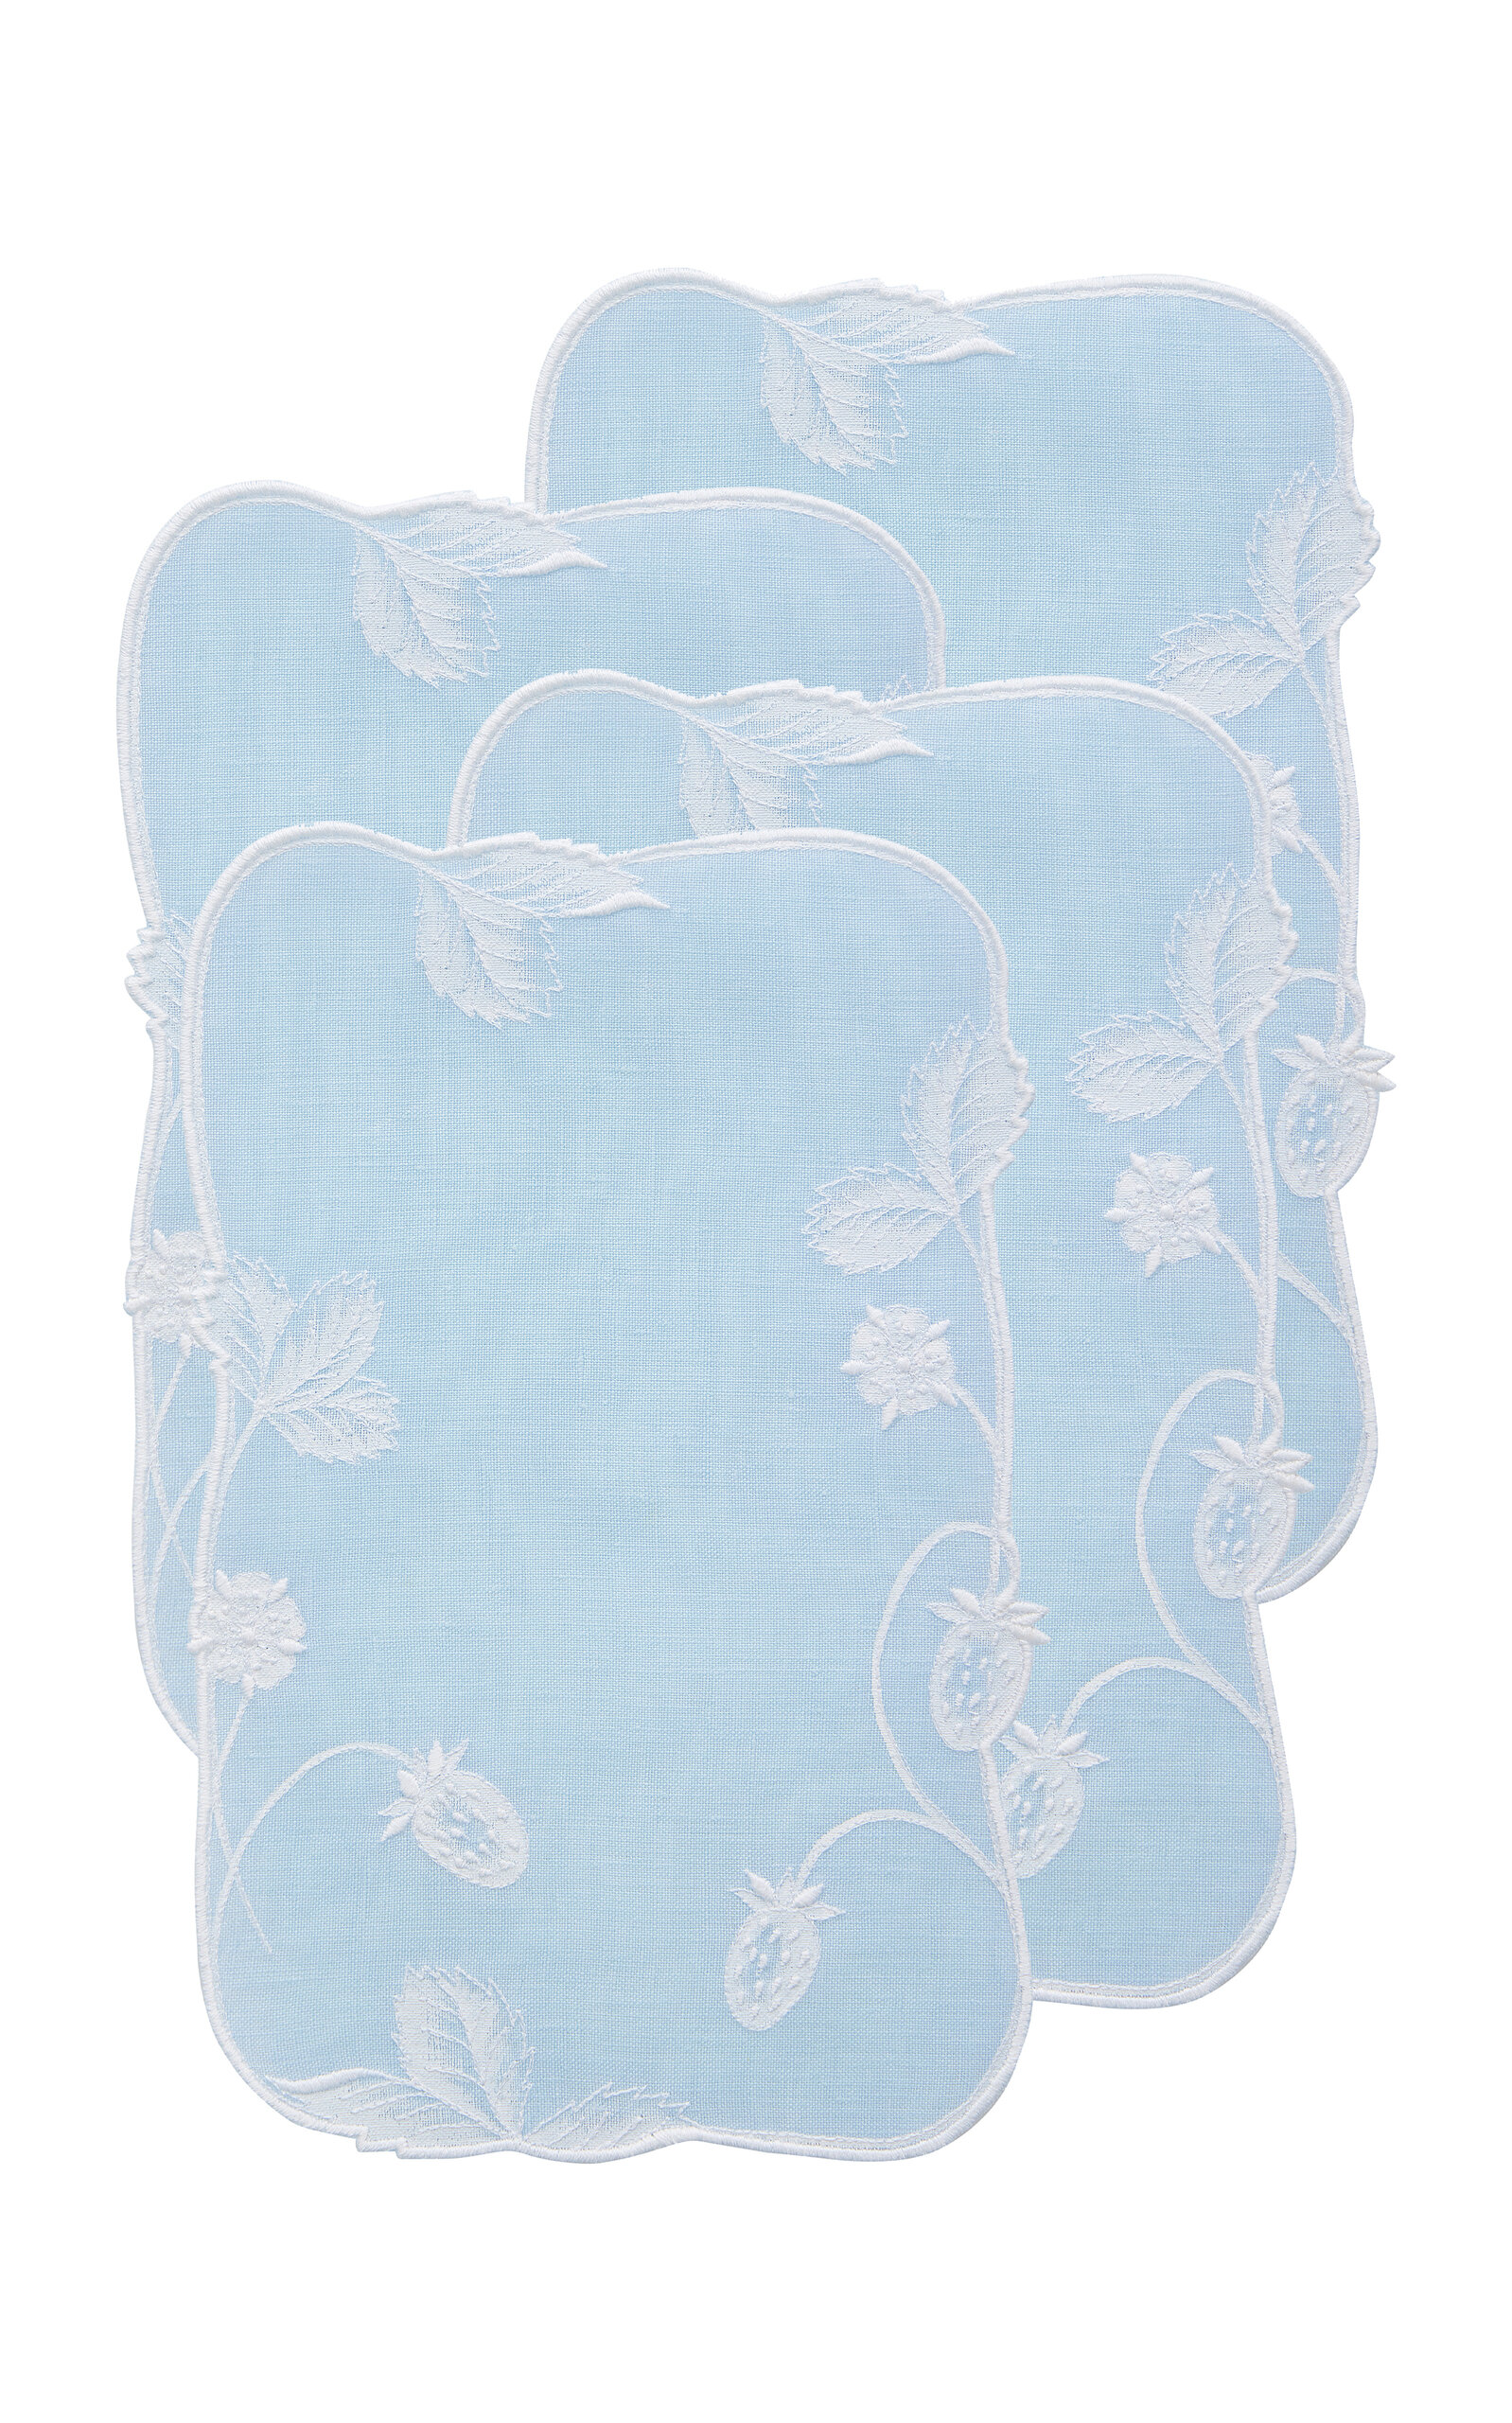 Atelier Houria Tazi Fructus Set-of-four Embroidered Linen Cocktail Napkins In Blue